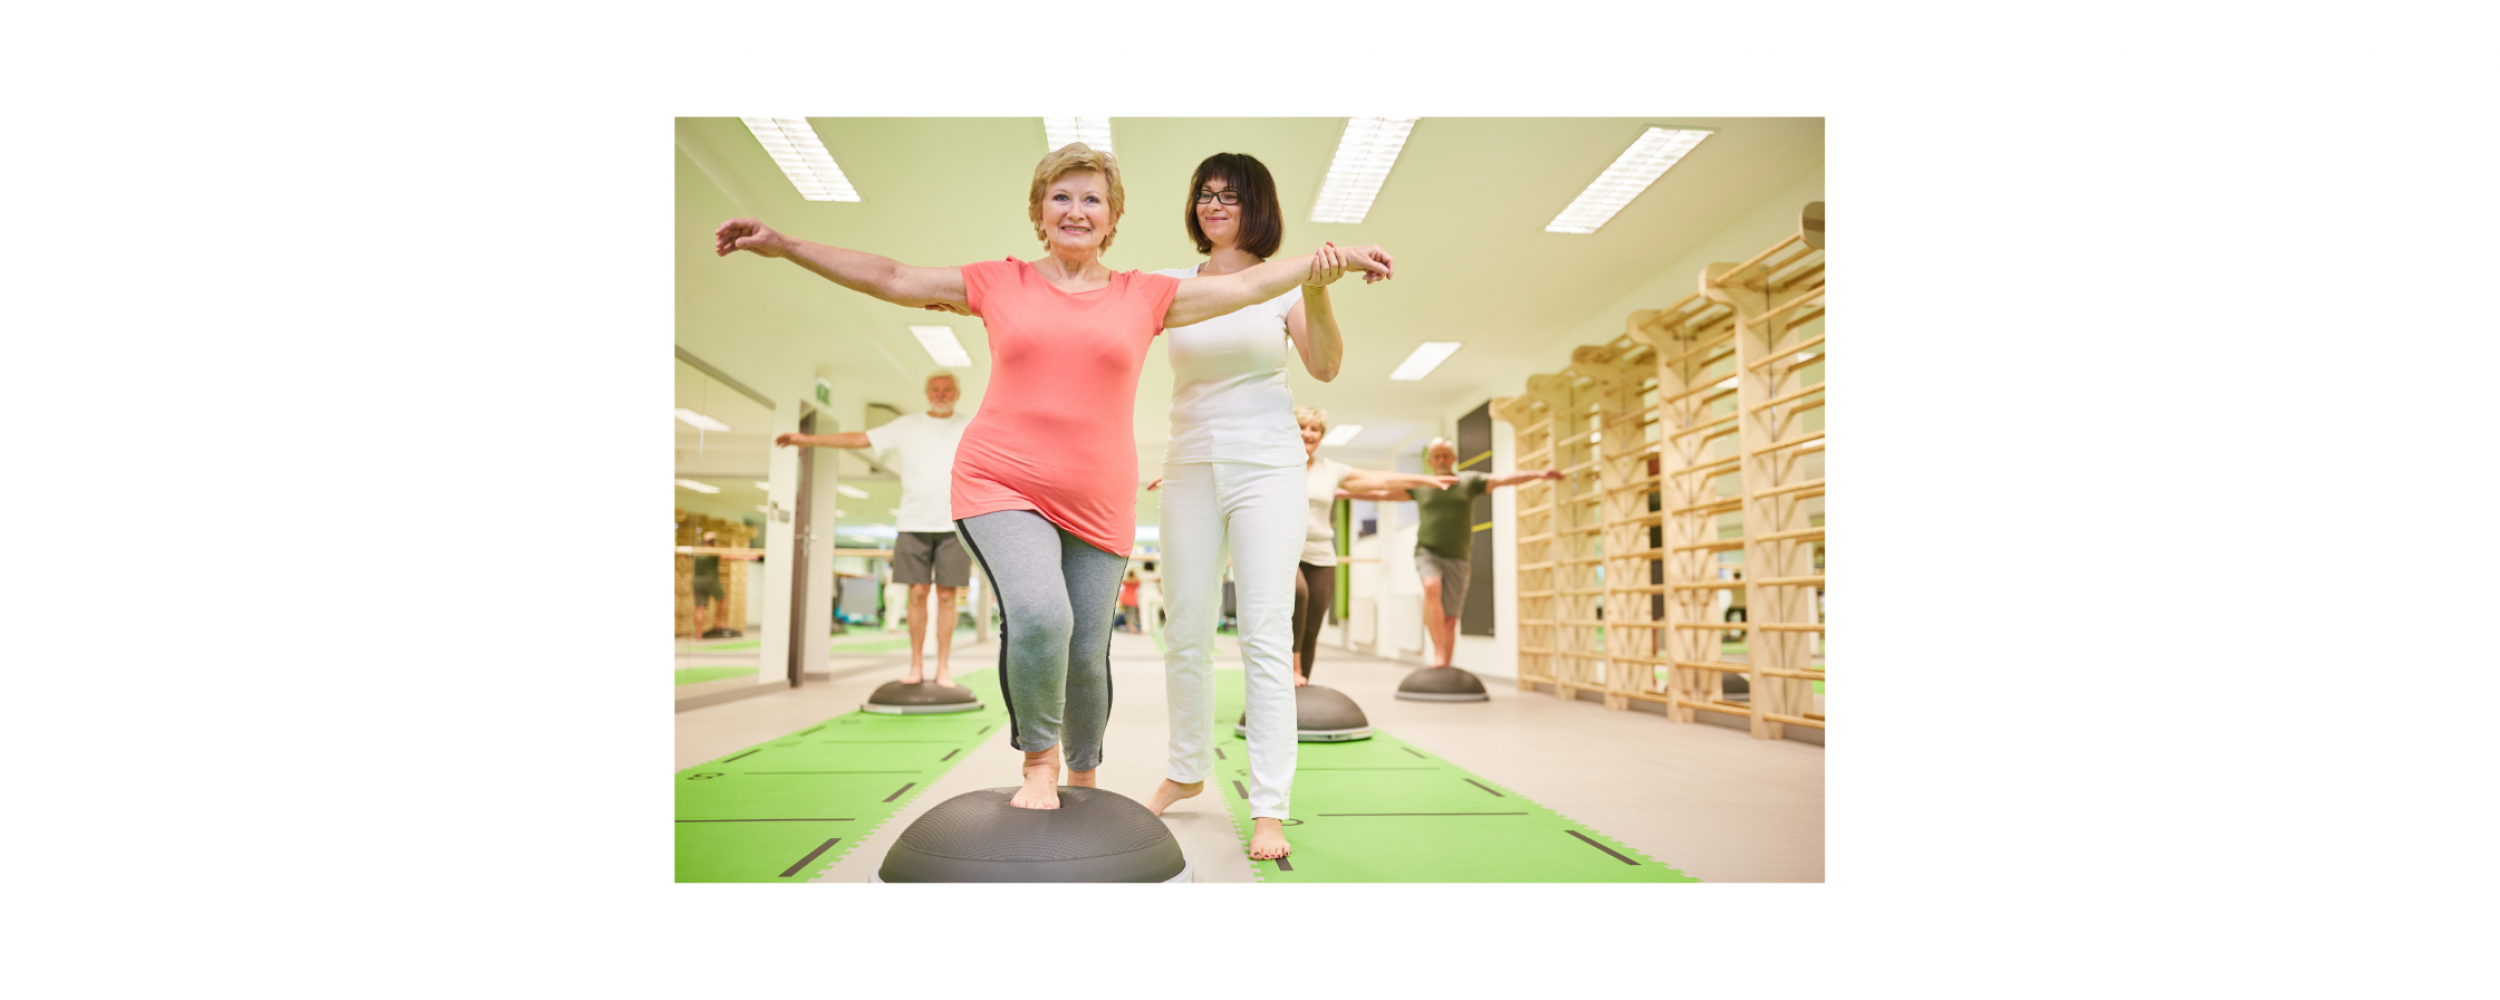 Trainer helps senior woman with balance training on the Bosu Ball in a fitness class